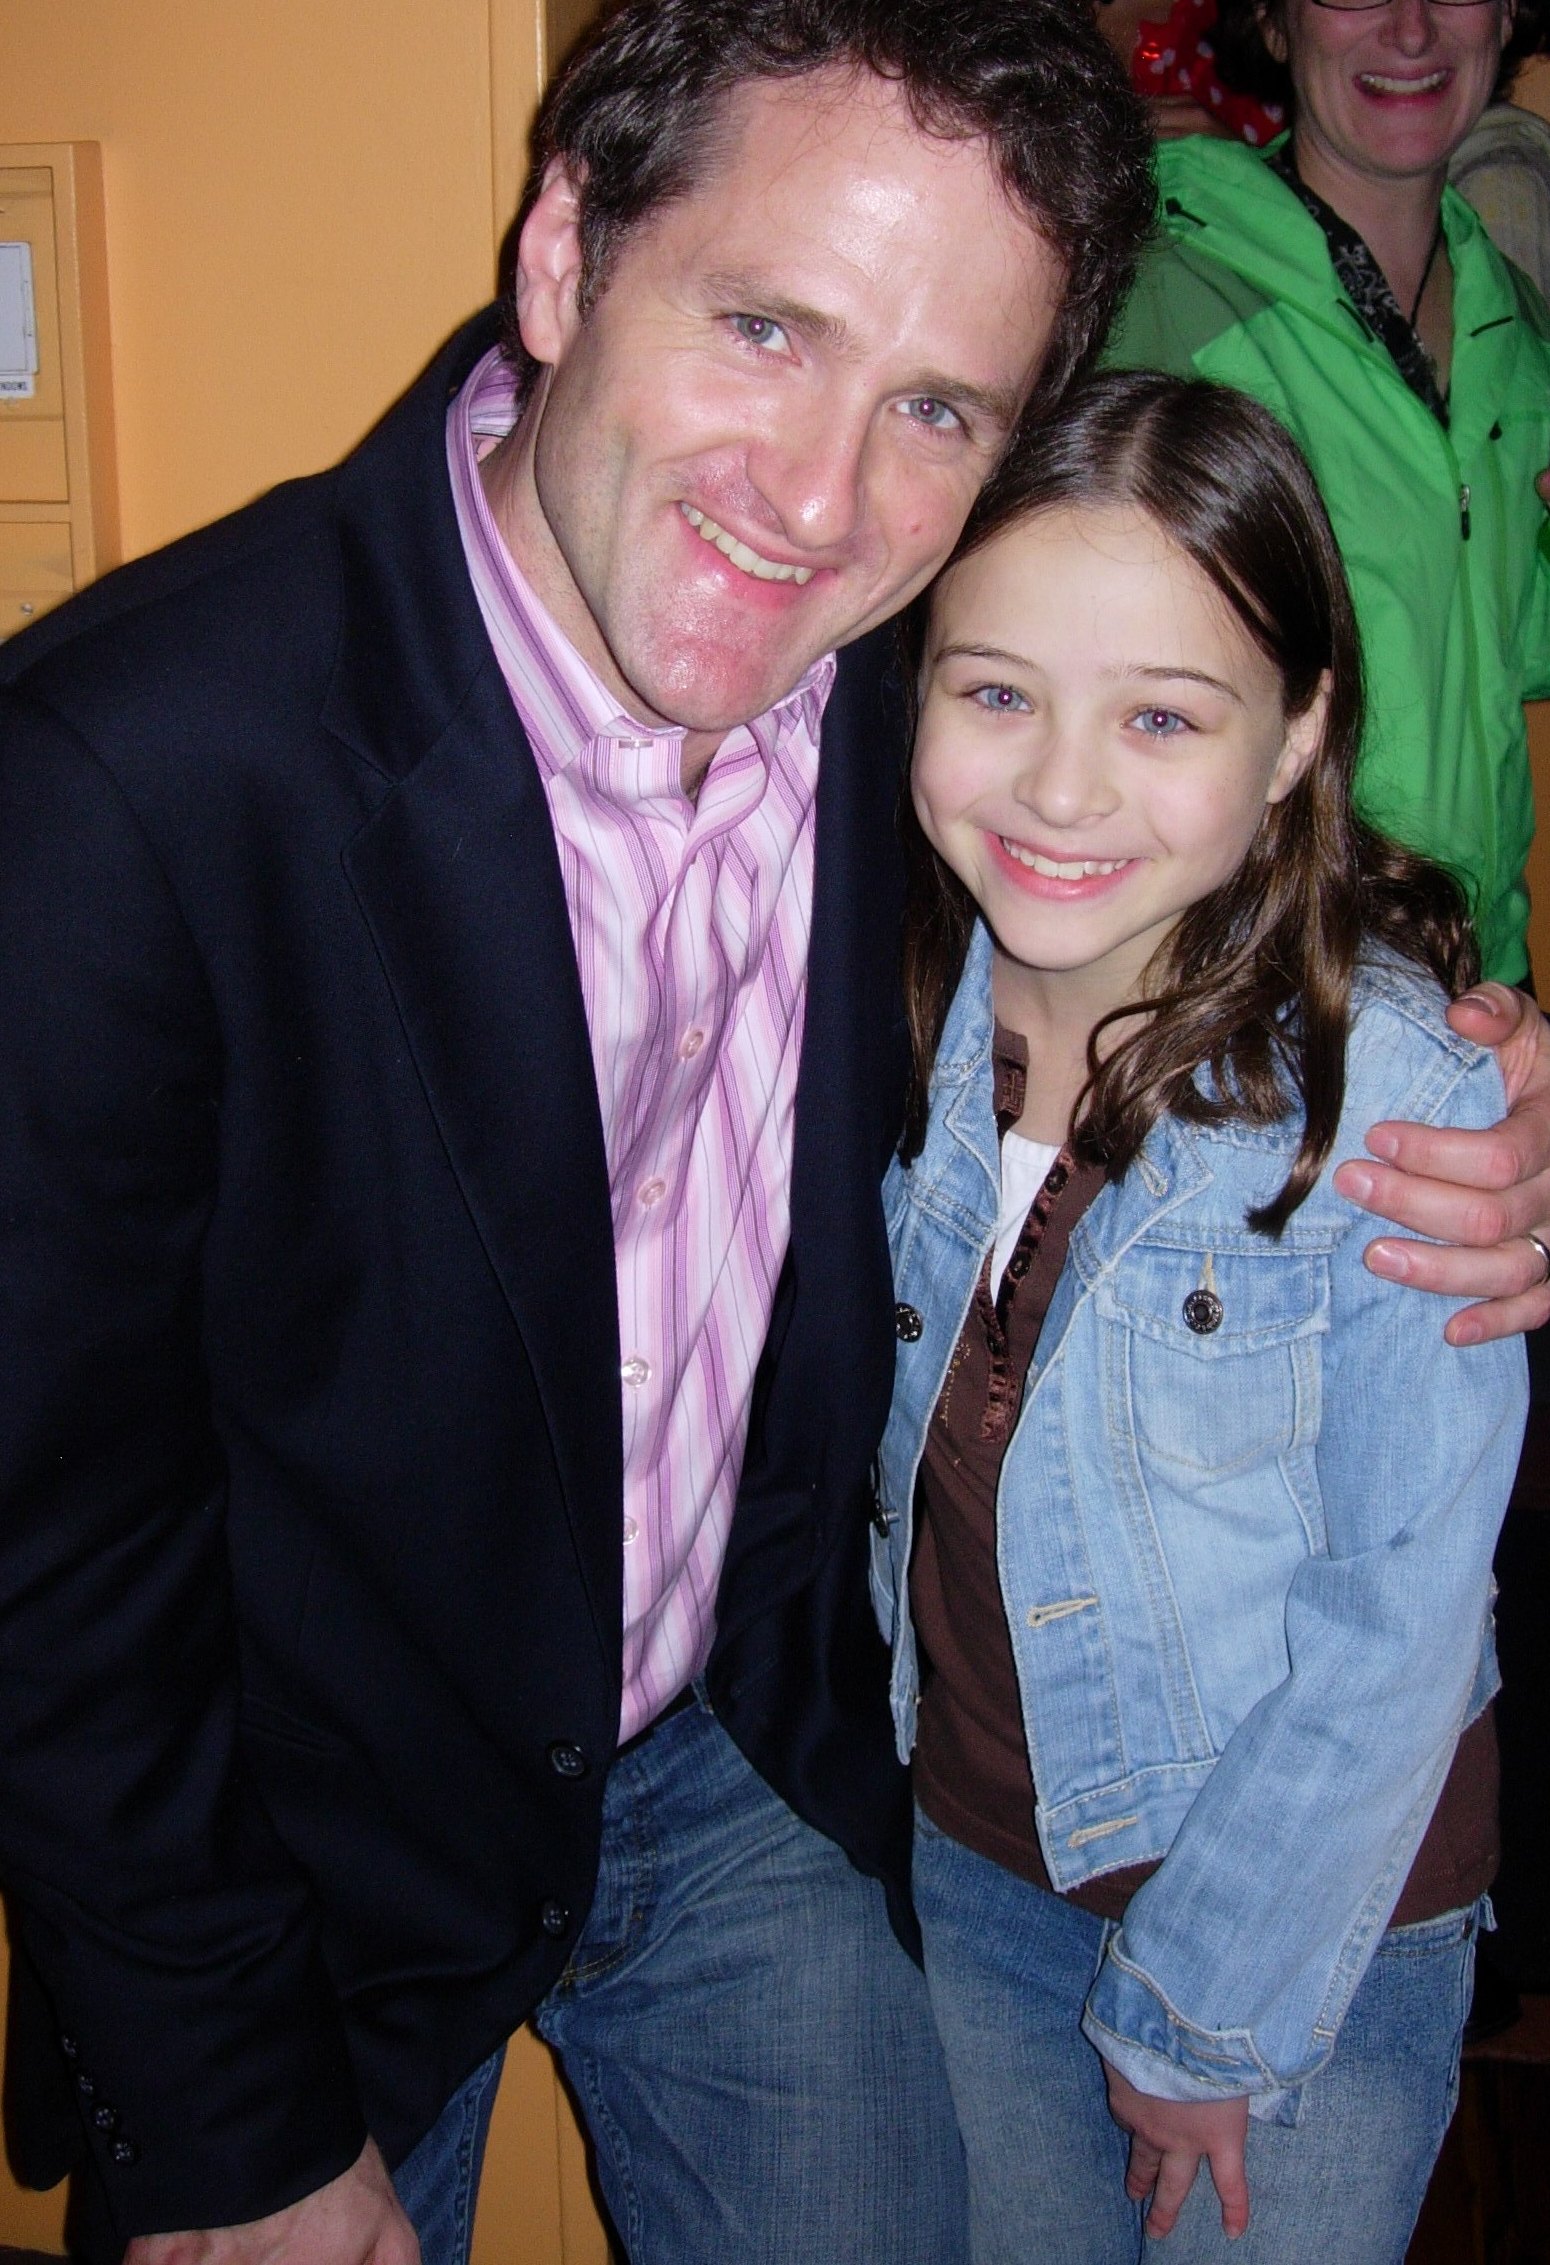 Abigail and Jim True-Frost at the Opening Party for The Pillowman (Steppenwolf Theatre)